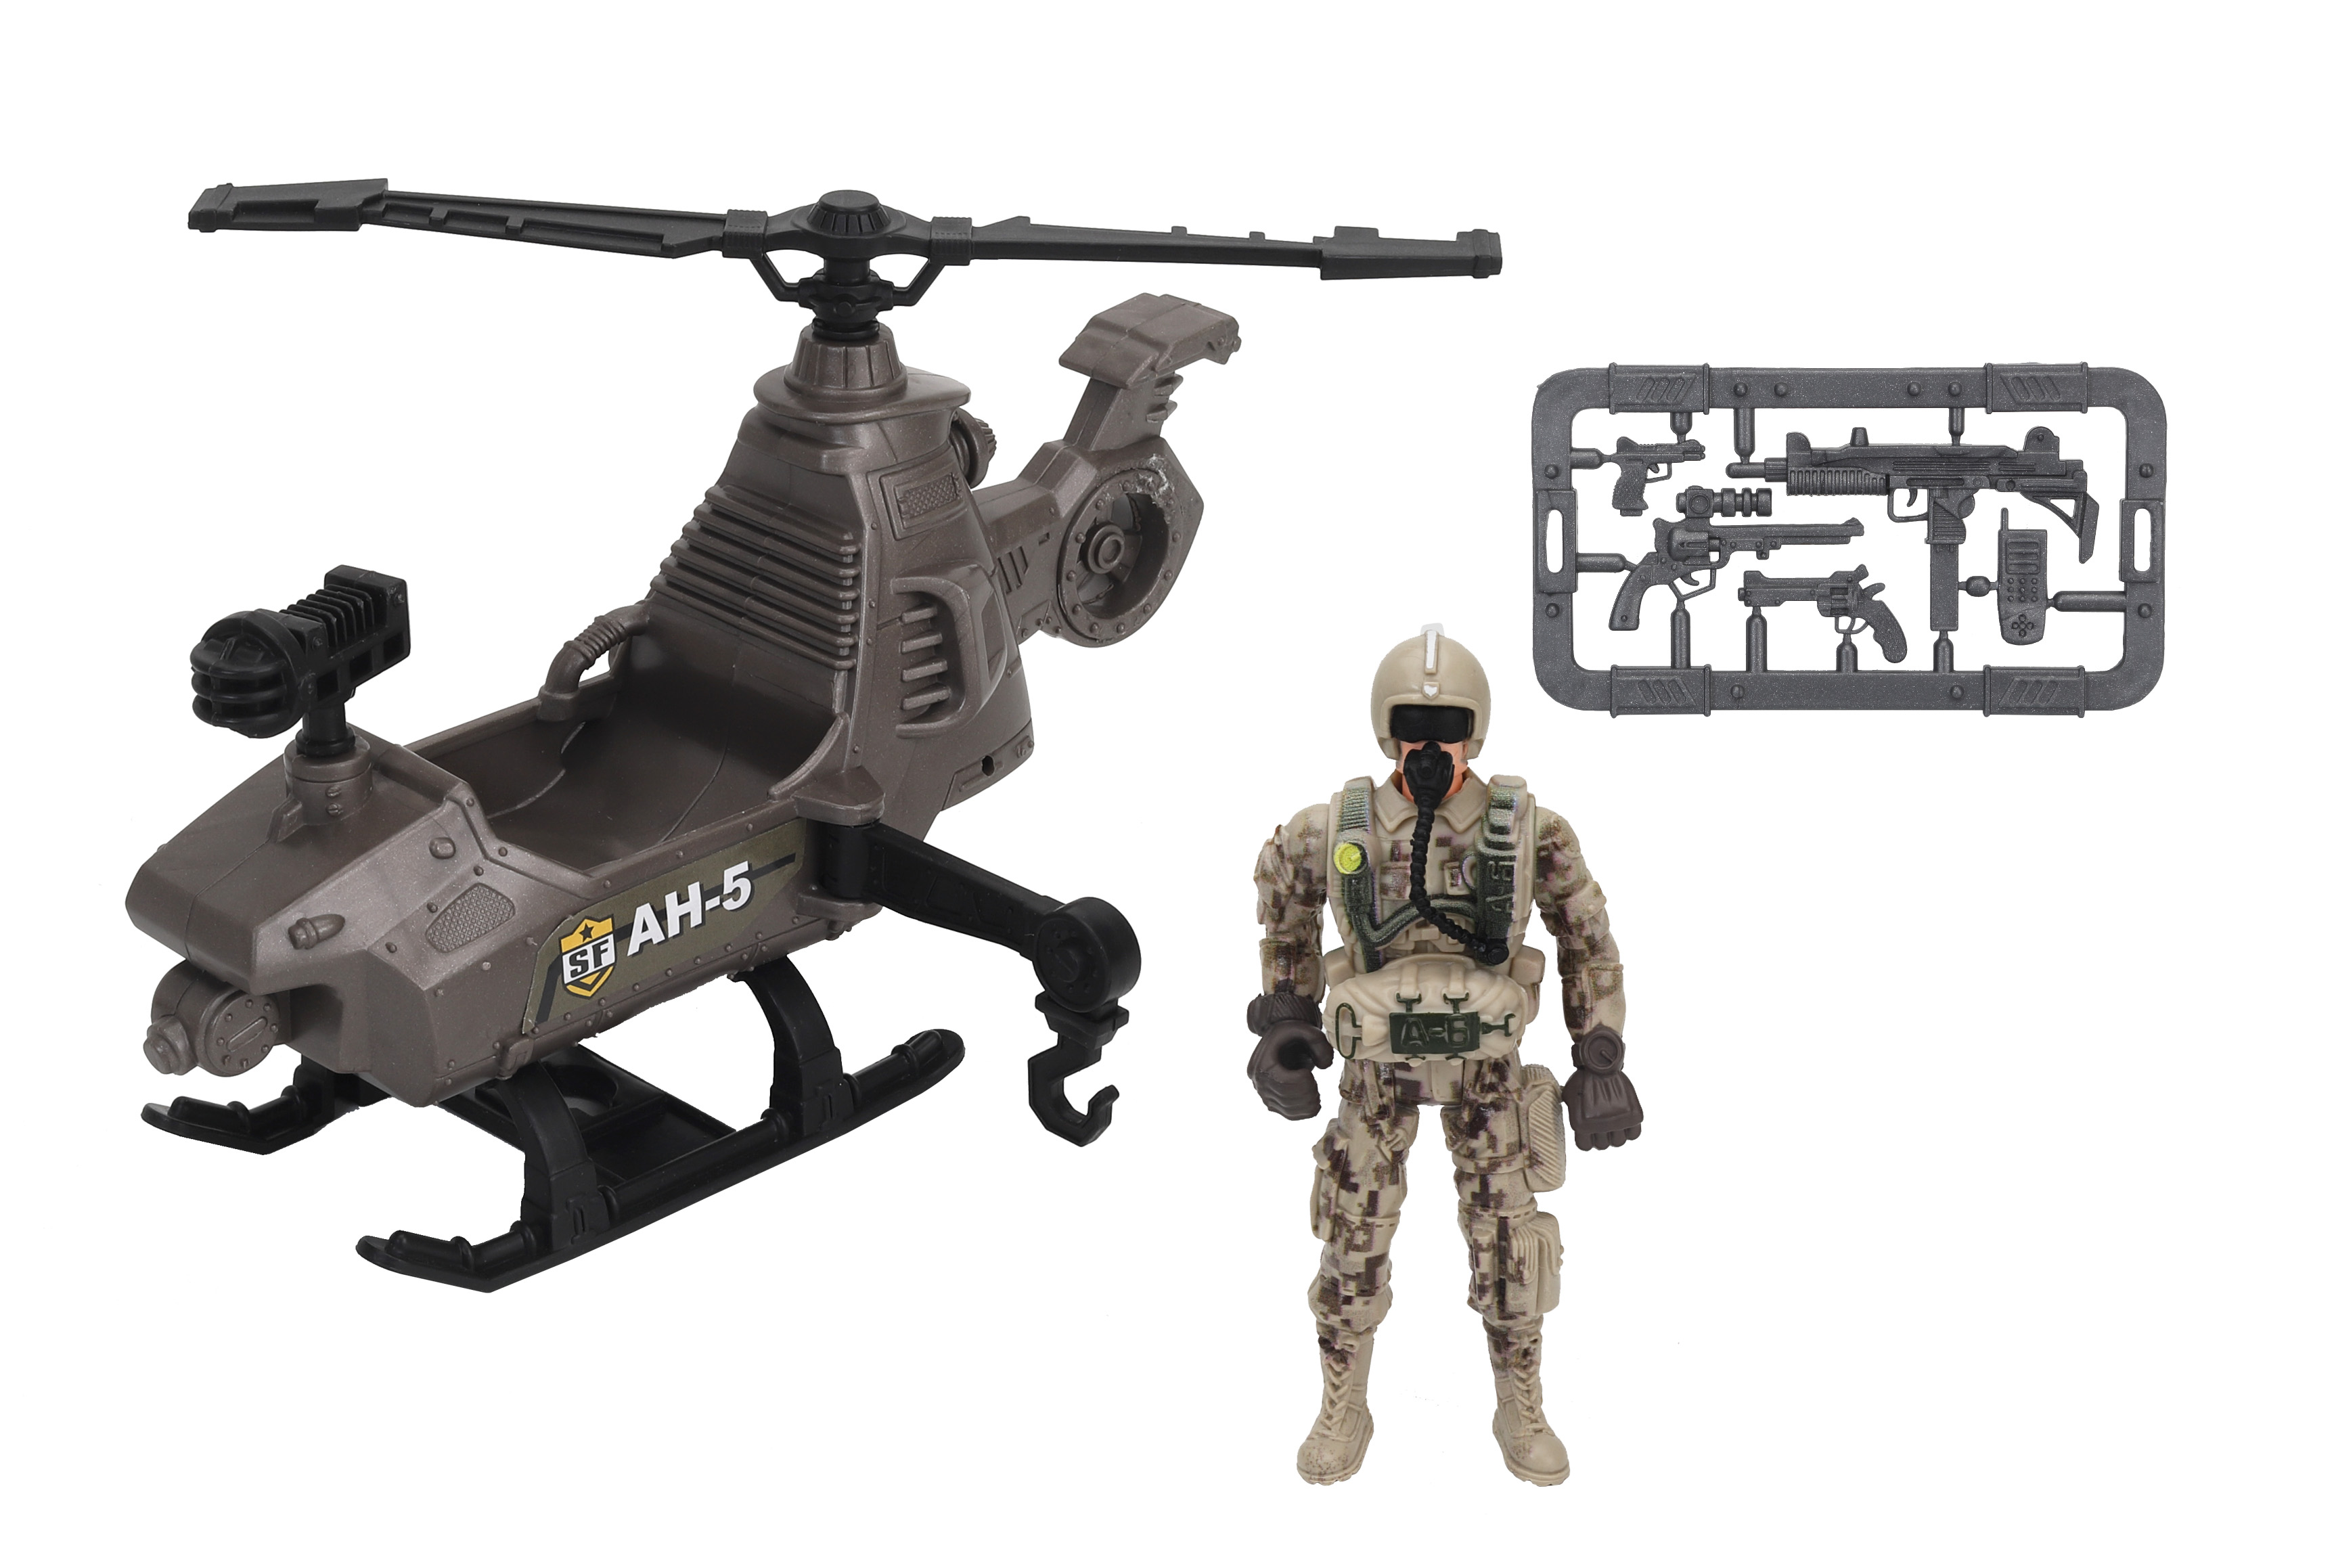 Soldier Force - Stealth Helicopter Mission Playset